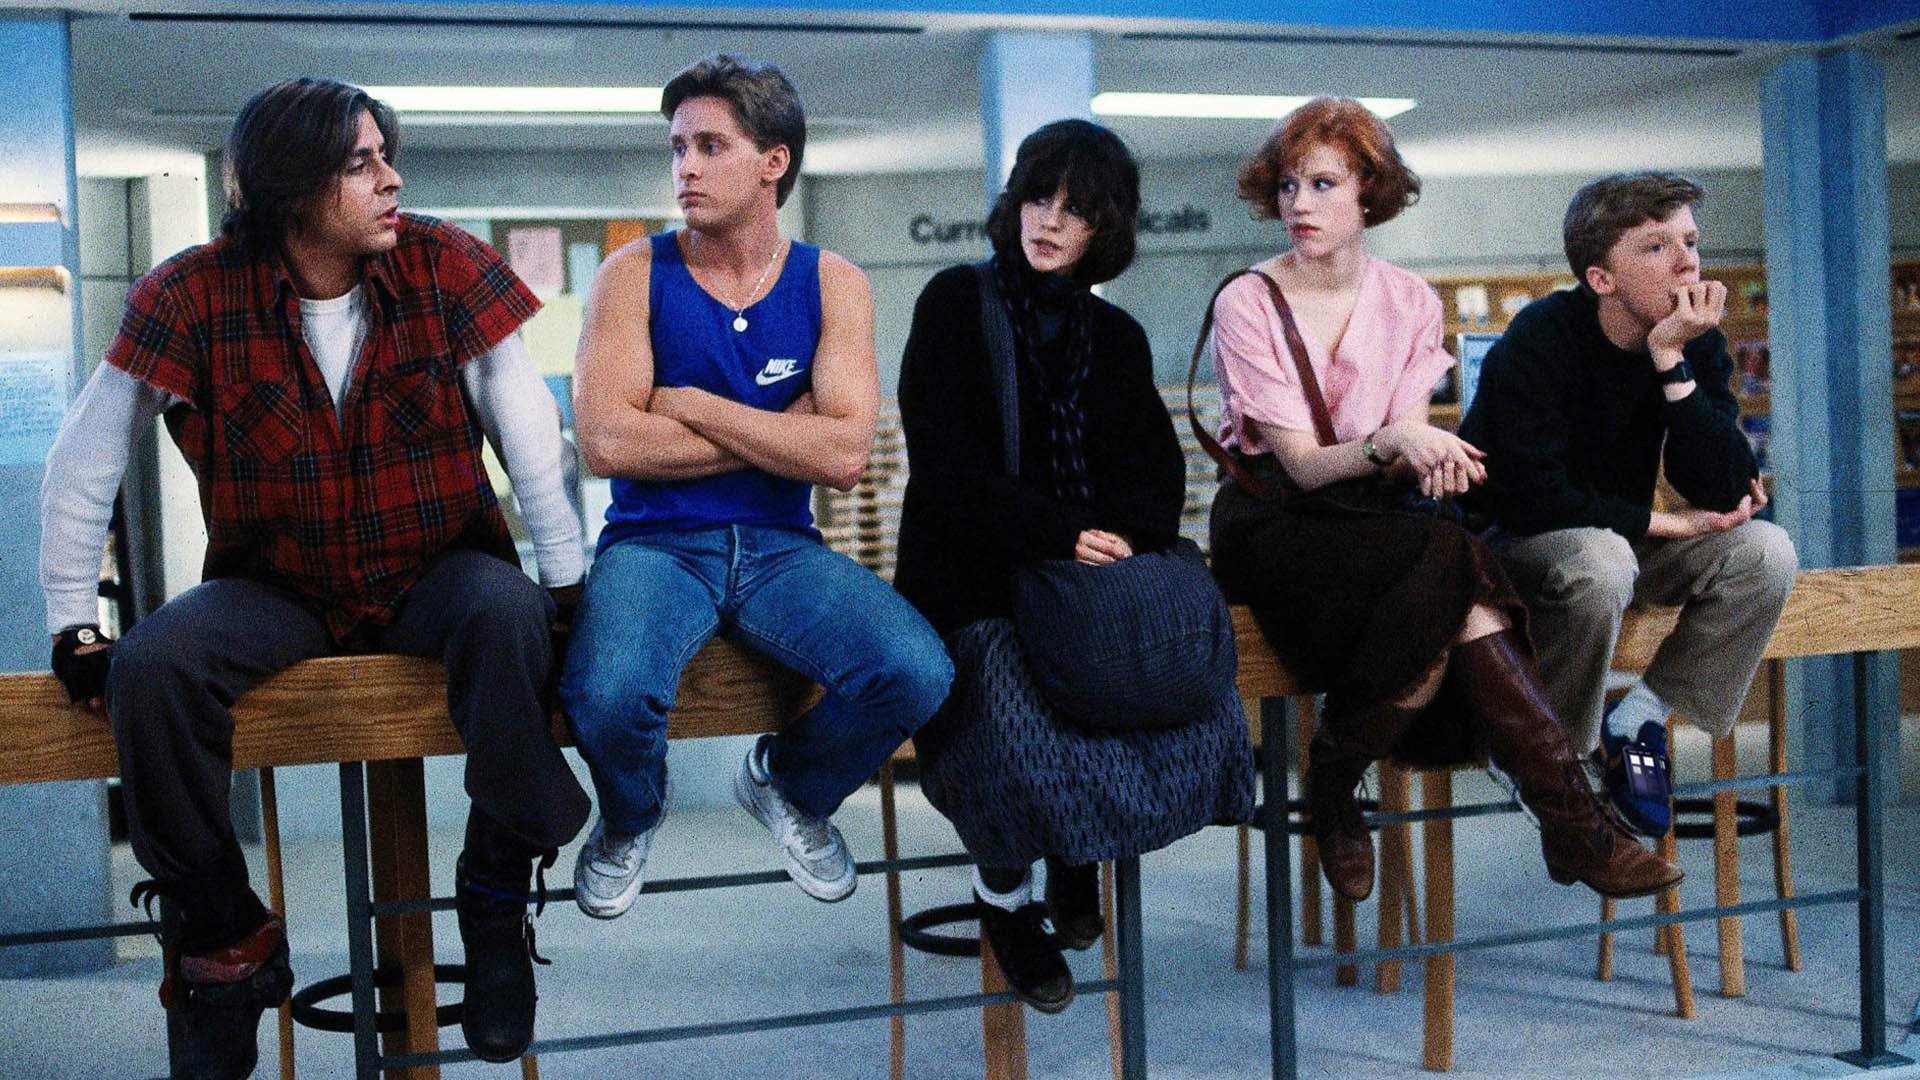 The main characters of The Breakfast Club are talking in a punitive session